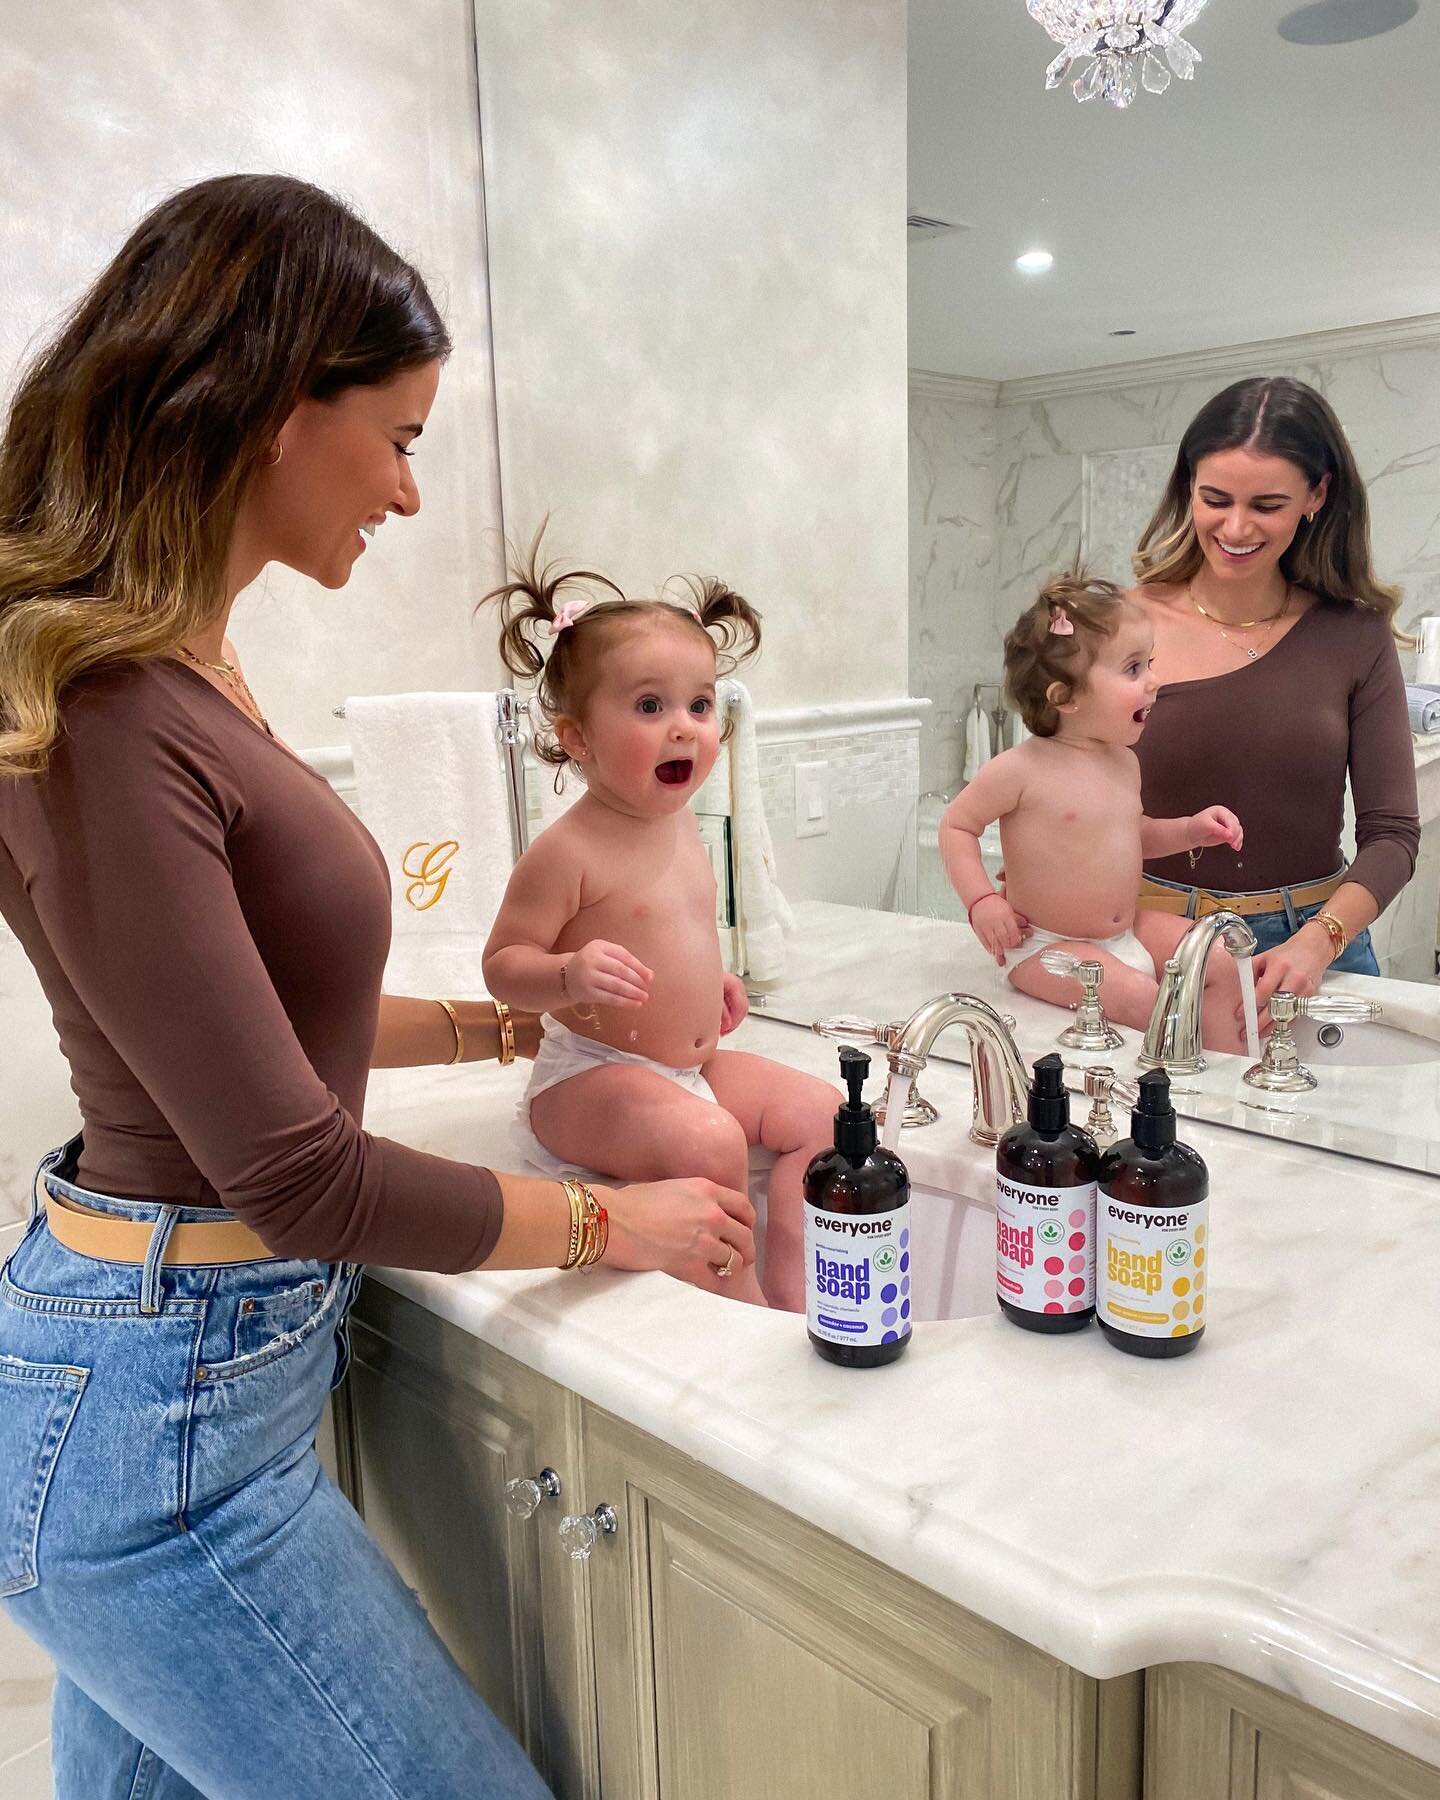 WASH YOUR HANDS!
and teach your mini's the importance of keeping clean with cleaner products.

@everyoneproducts just rebranded with UV-blocking dark amber colored bottles to protect the ingredients inside + updated their labels to be more transparen